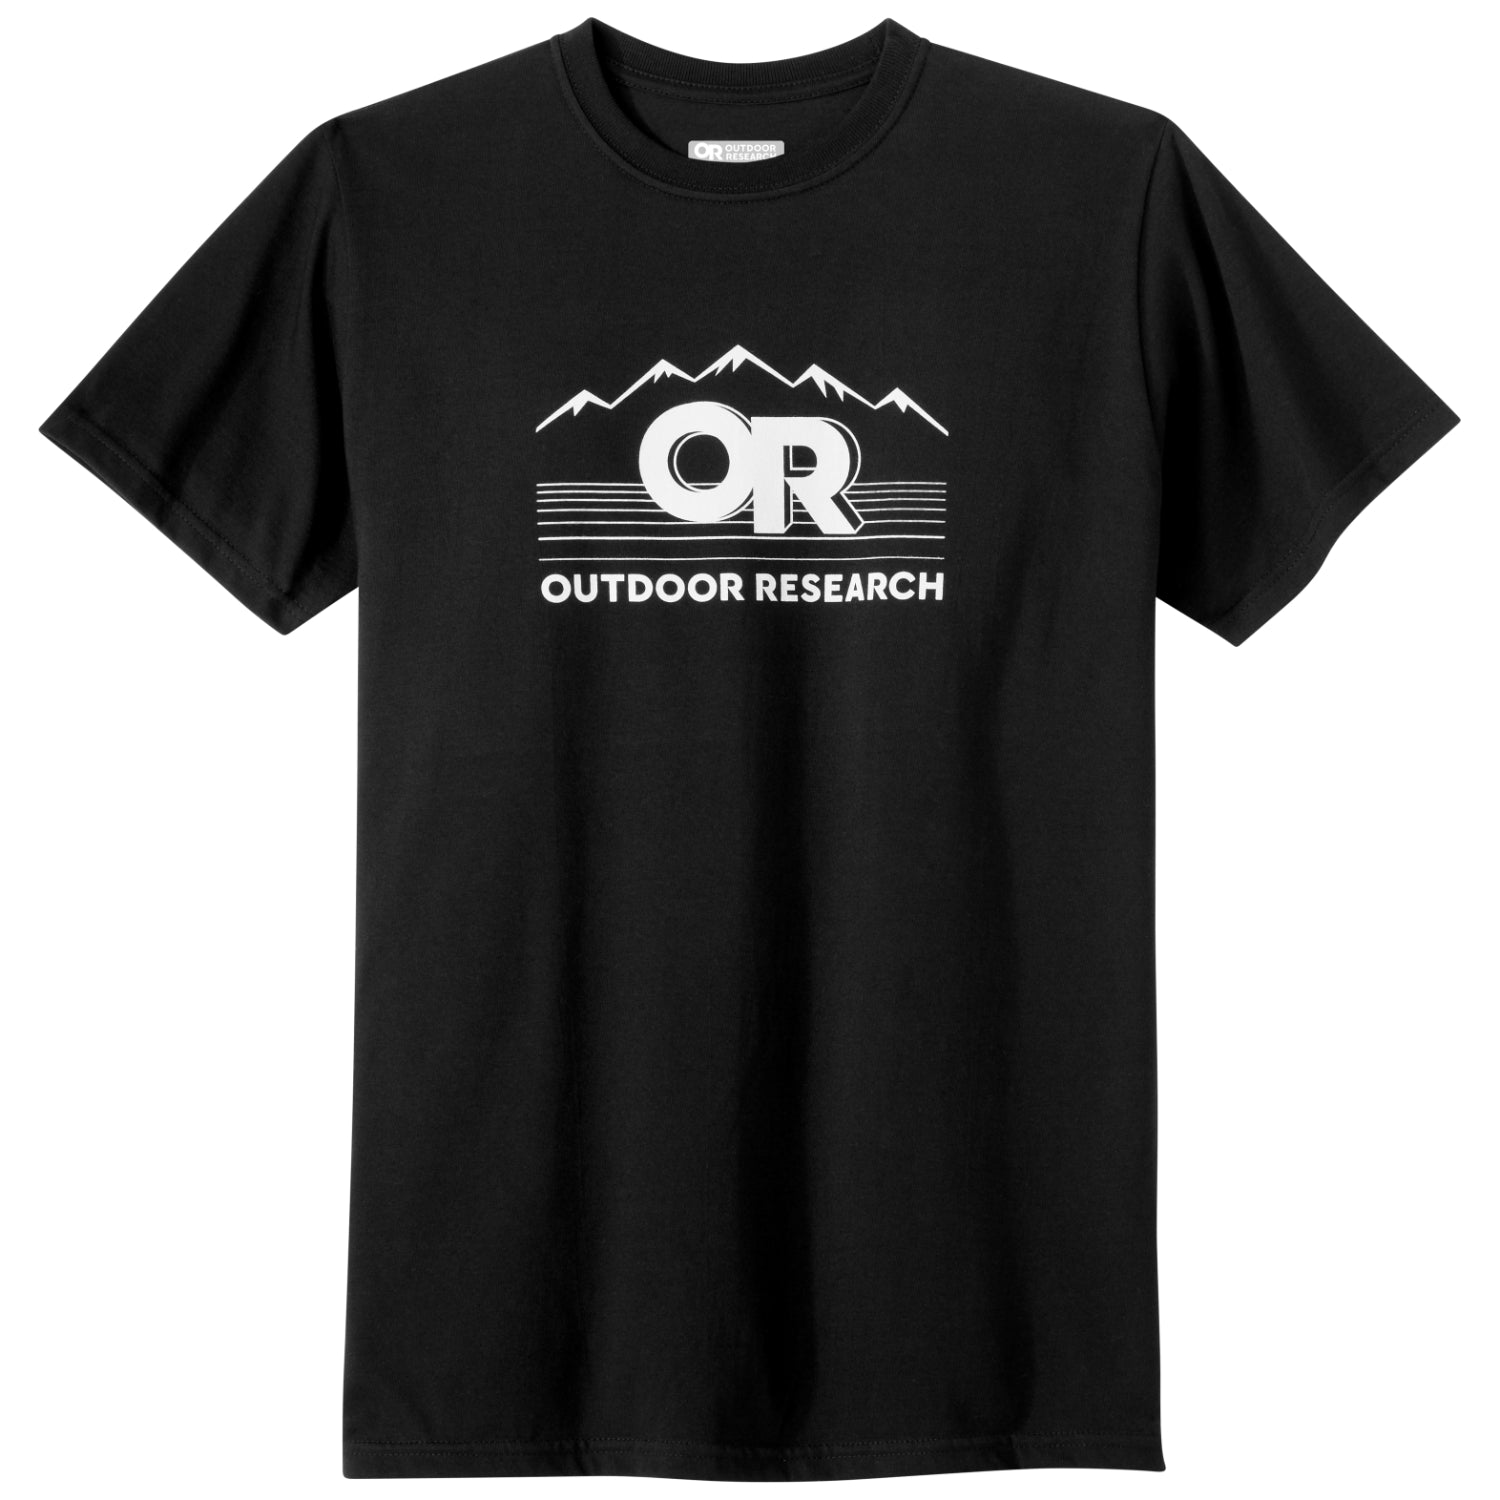 Outdoor Research Advocate Tee - Black/White